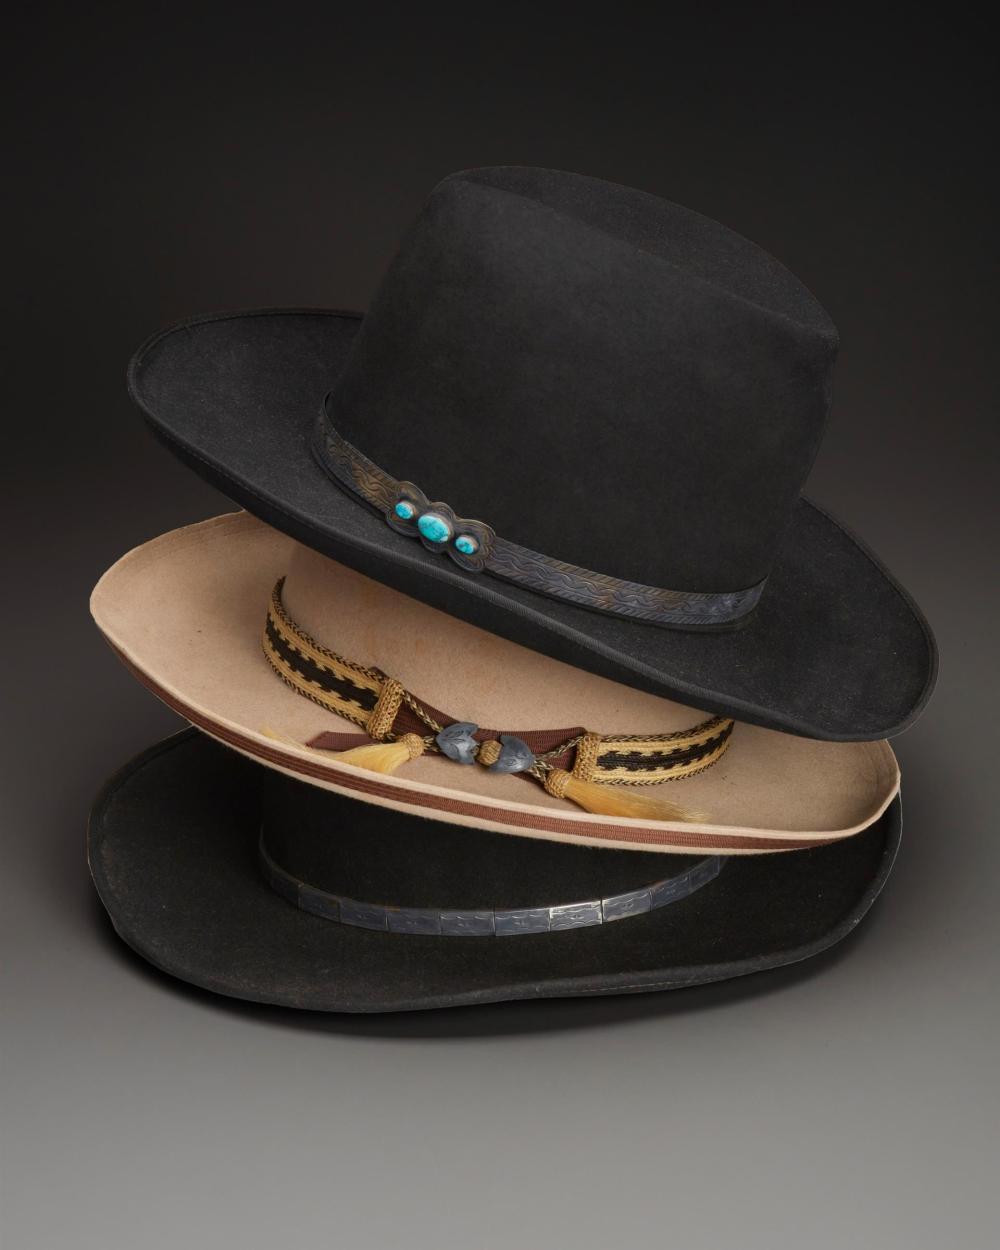 A GROUP OF THREE FELT HATS WITH 3447ce